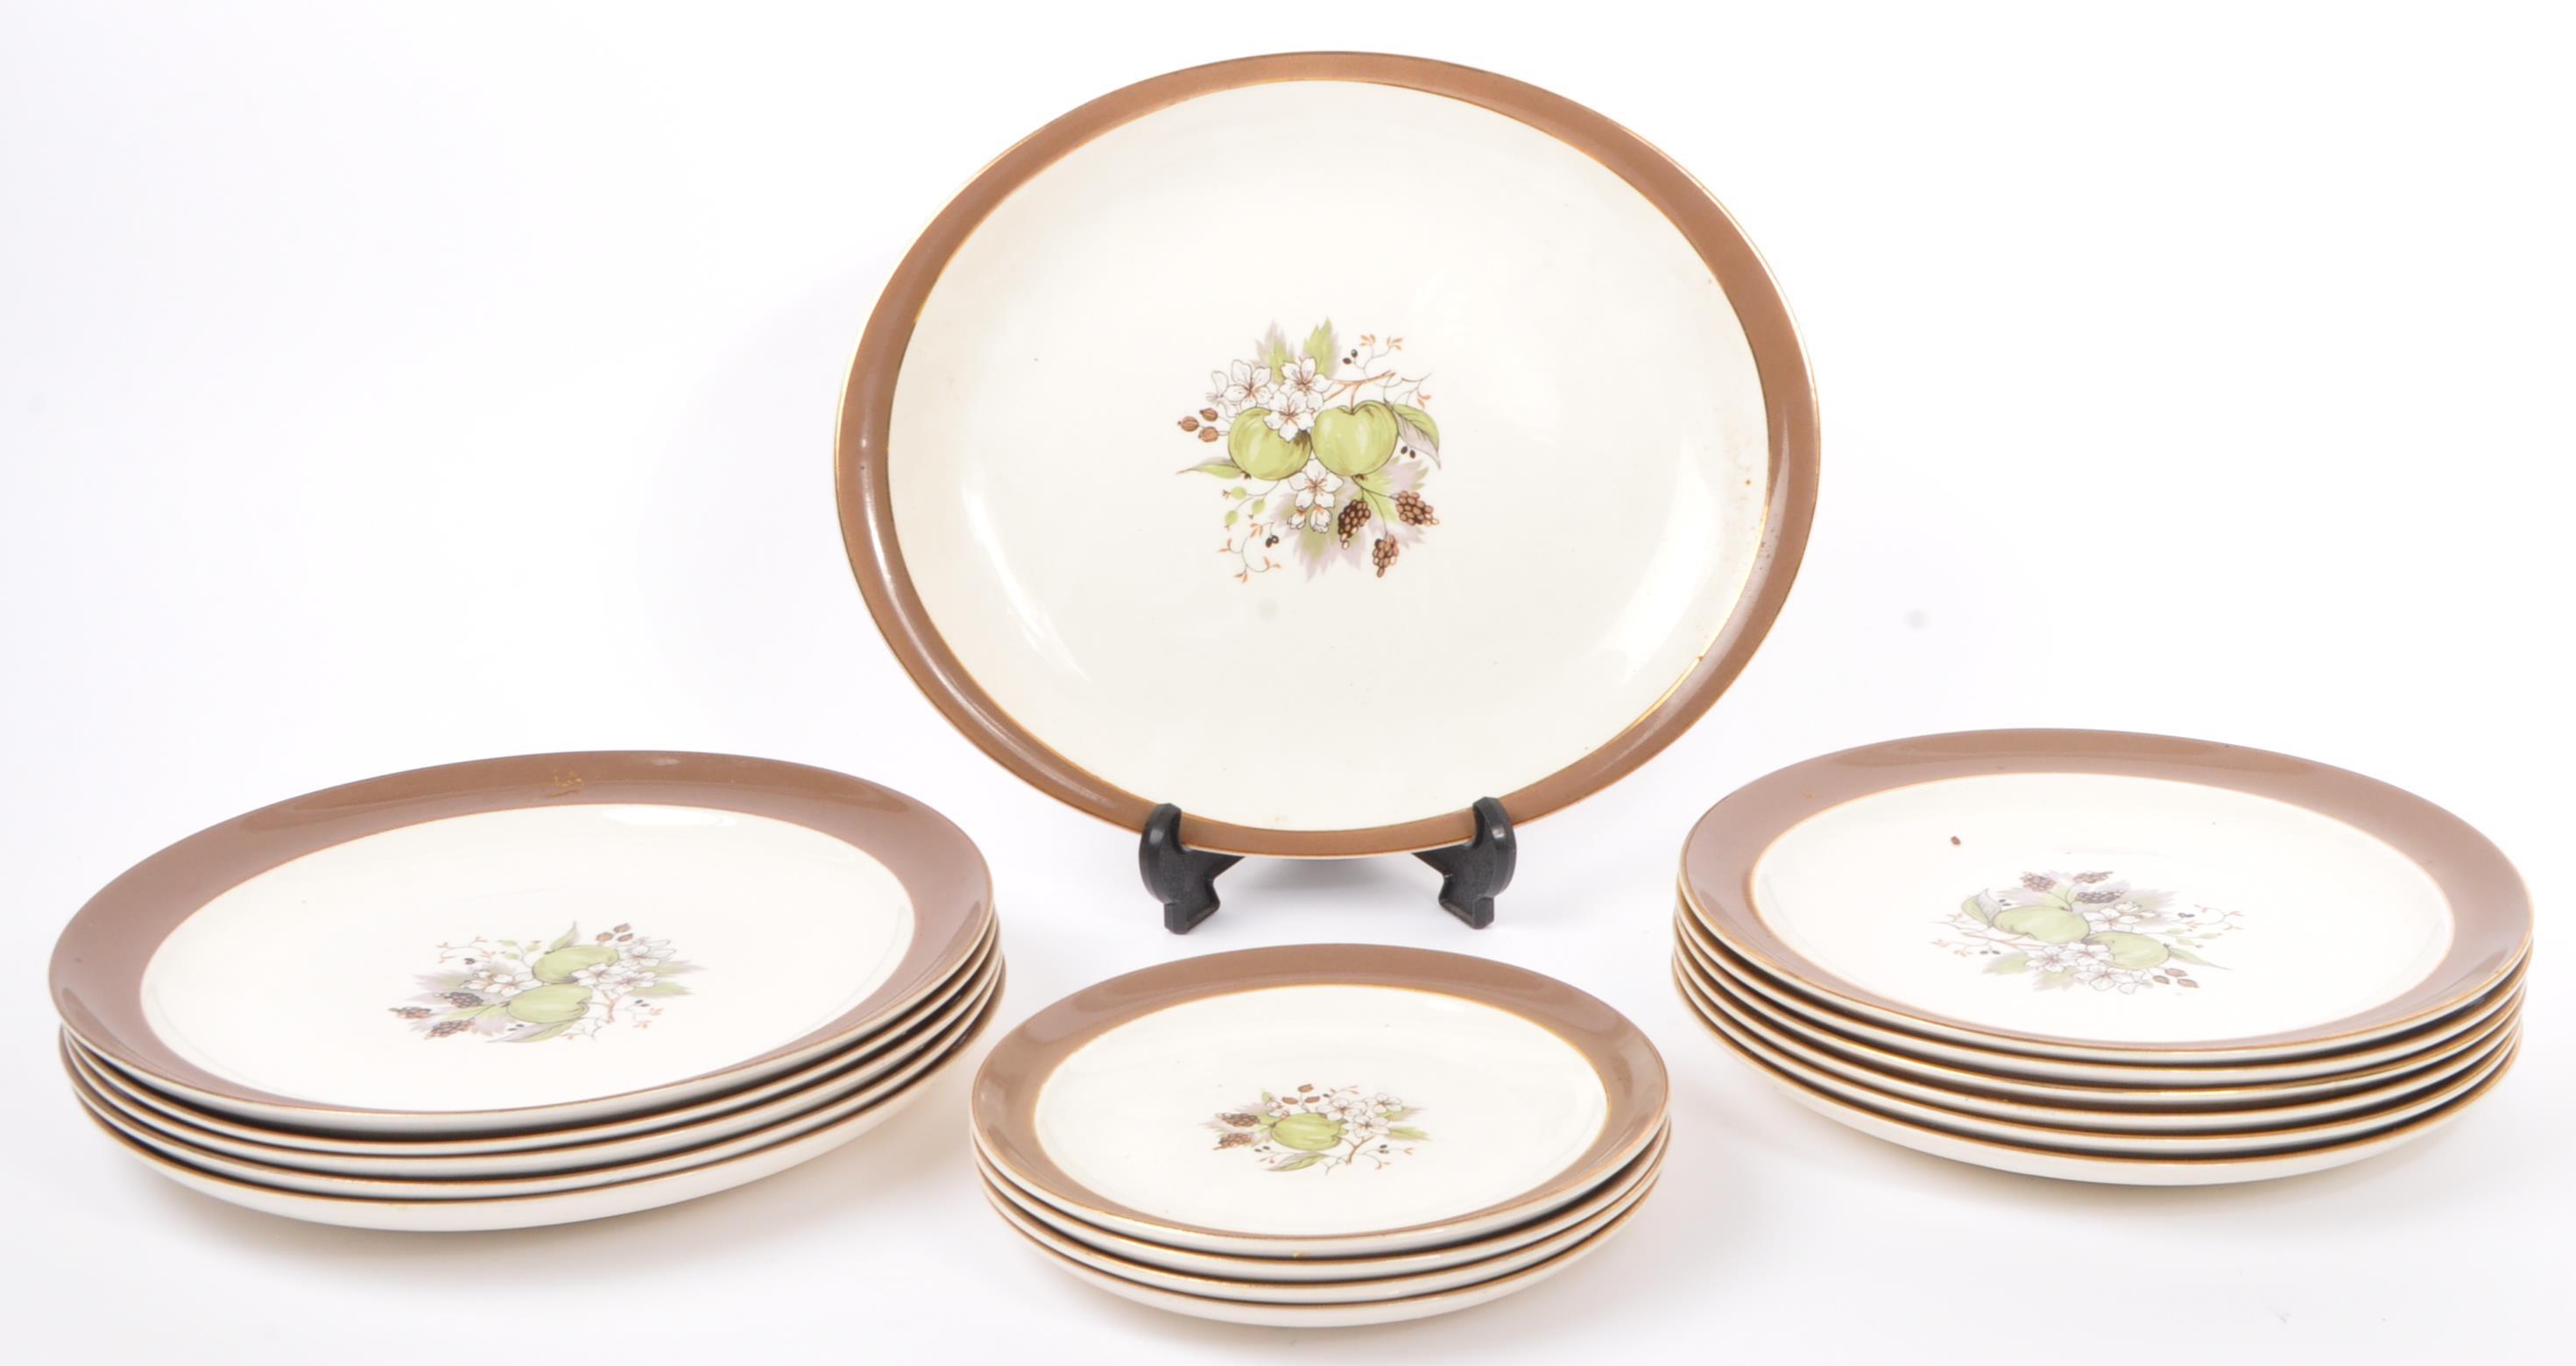 1950 MID CENTURY LINDEN LEA PATTERN PLATES BY BRISTOL POTTERY